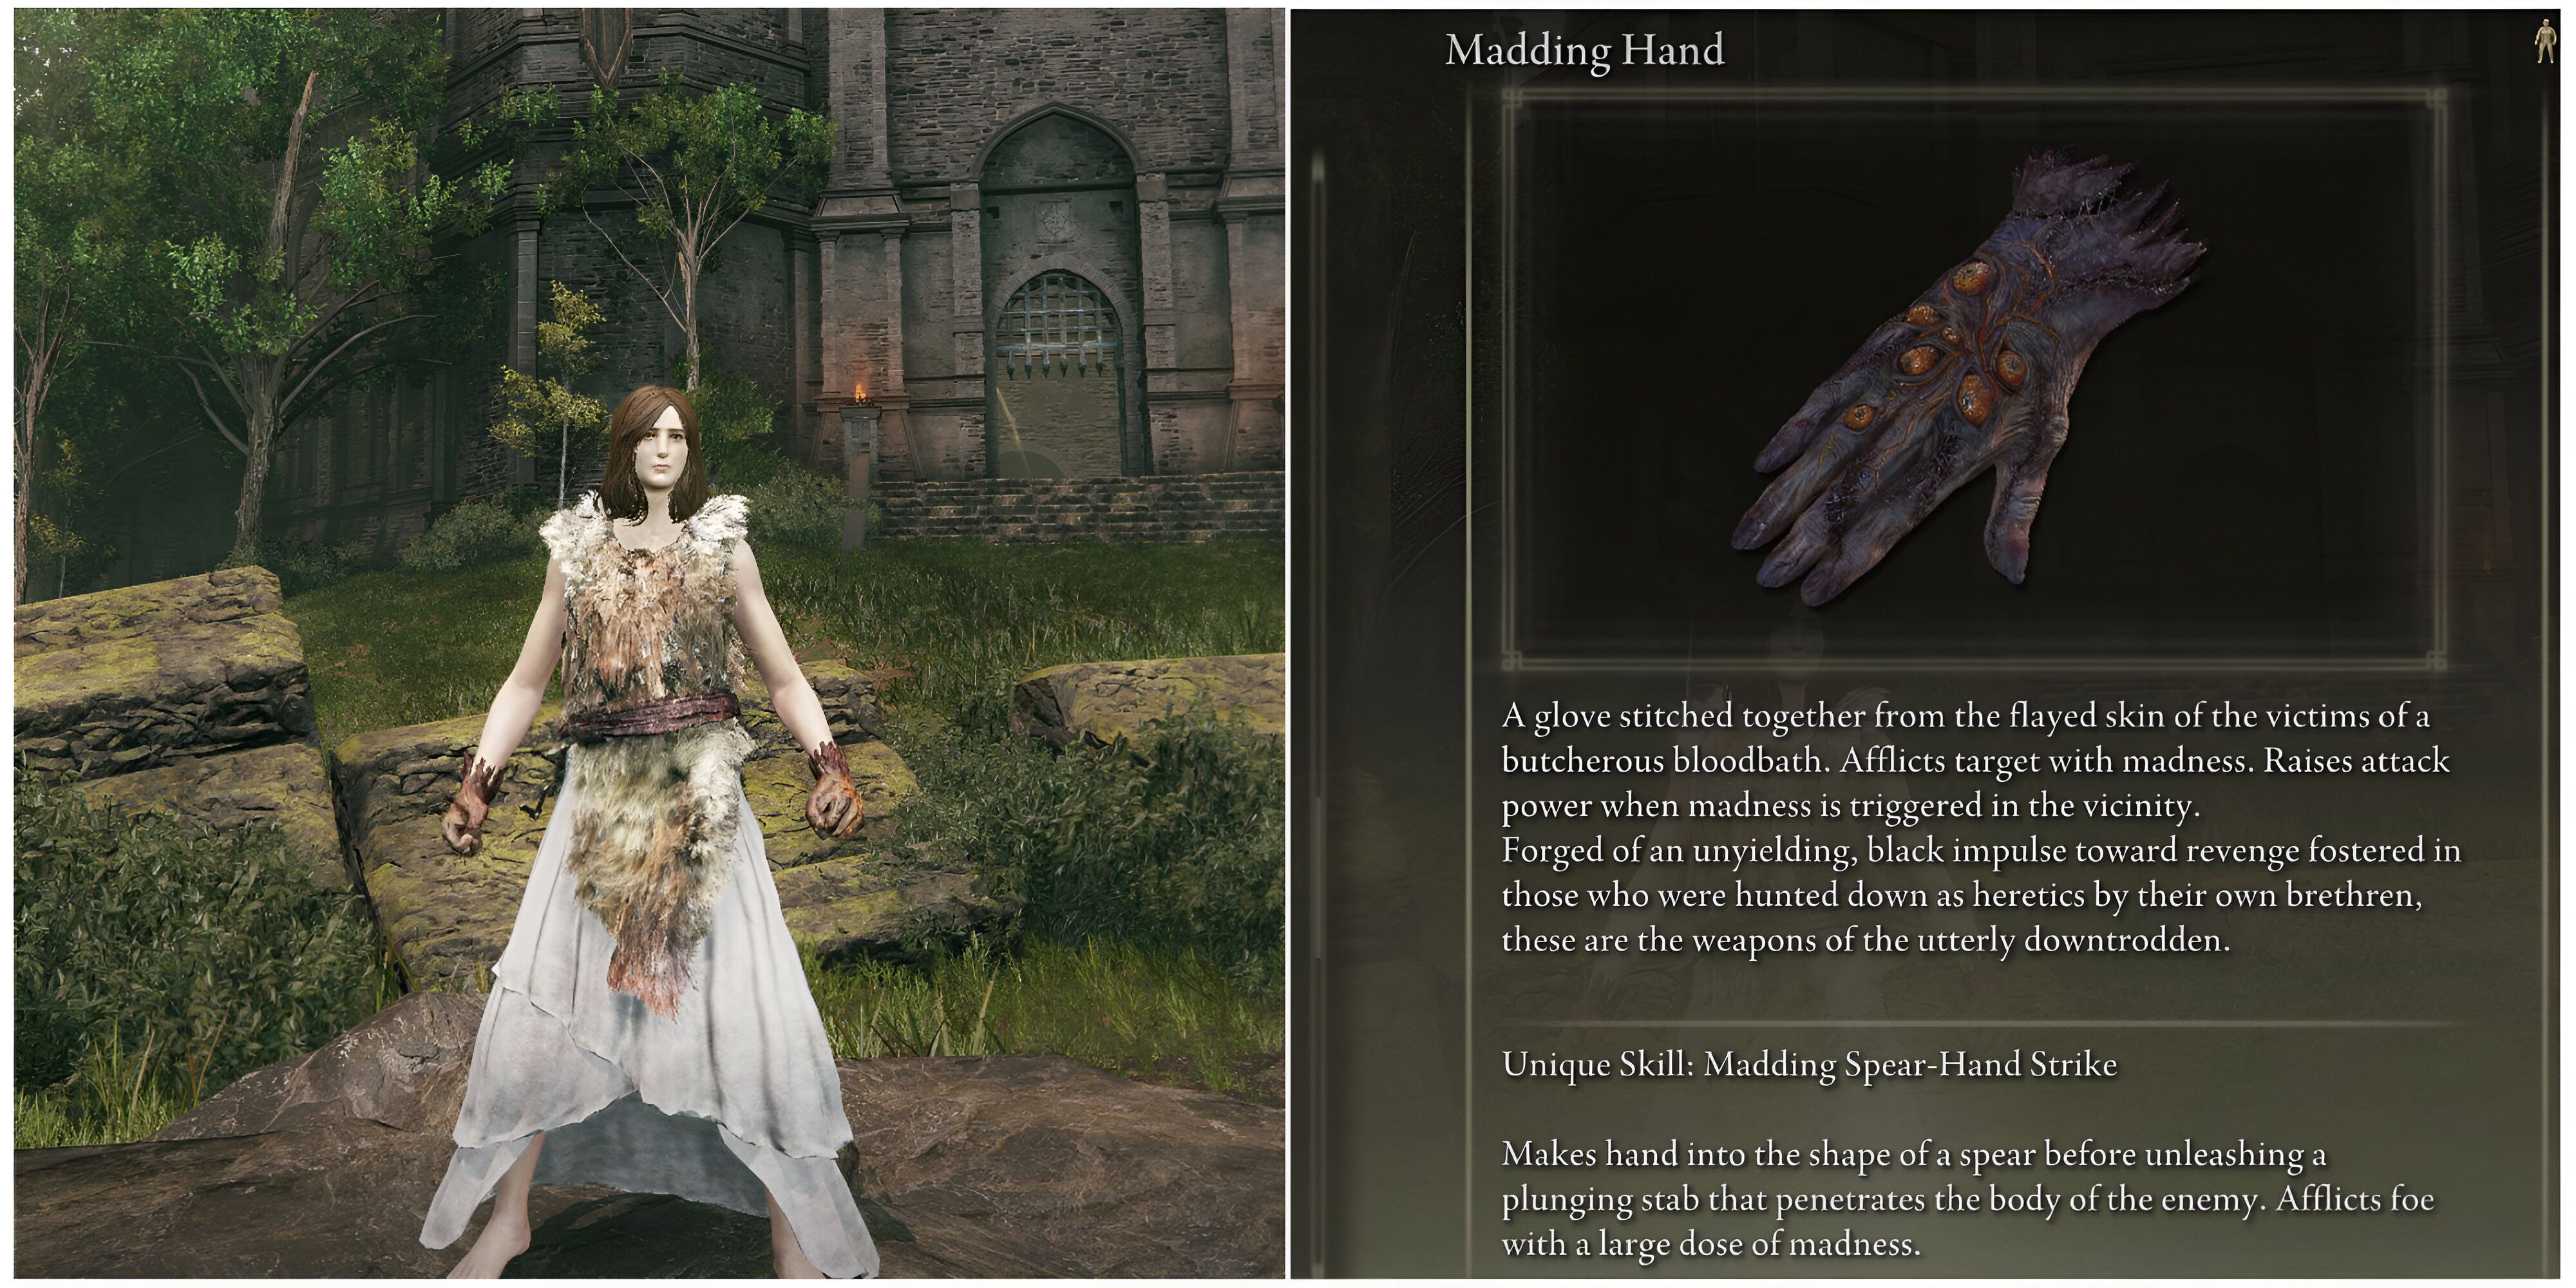 elden ring shadow of the erdtree madding hand showcase and description